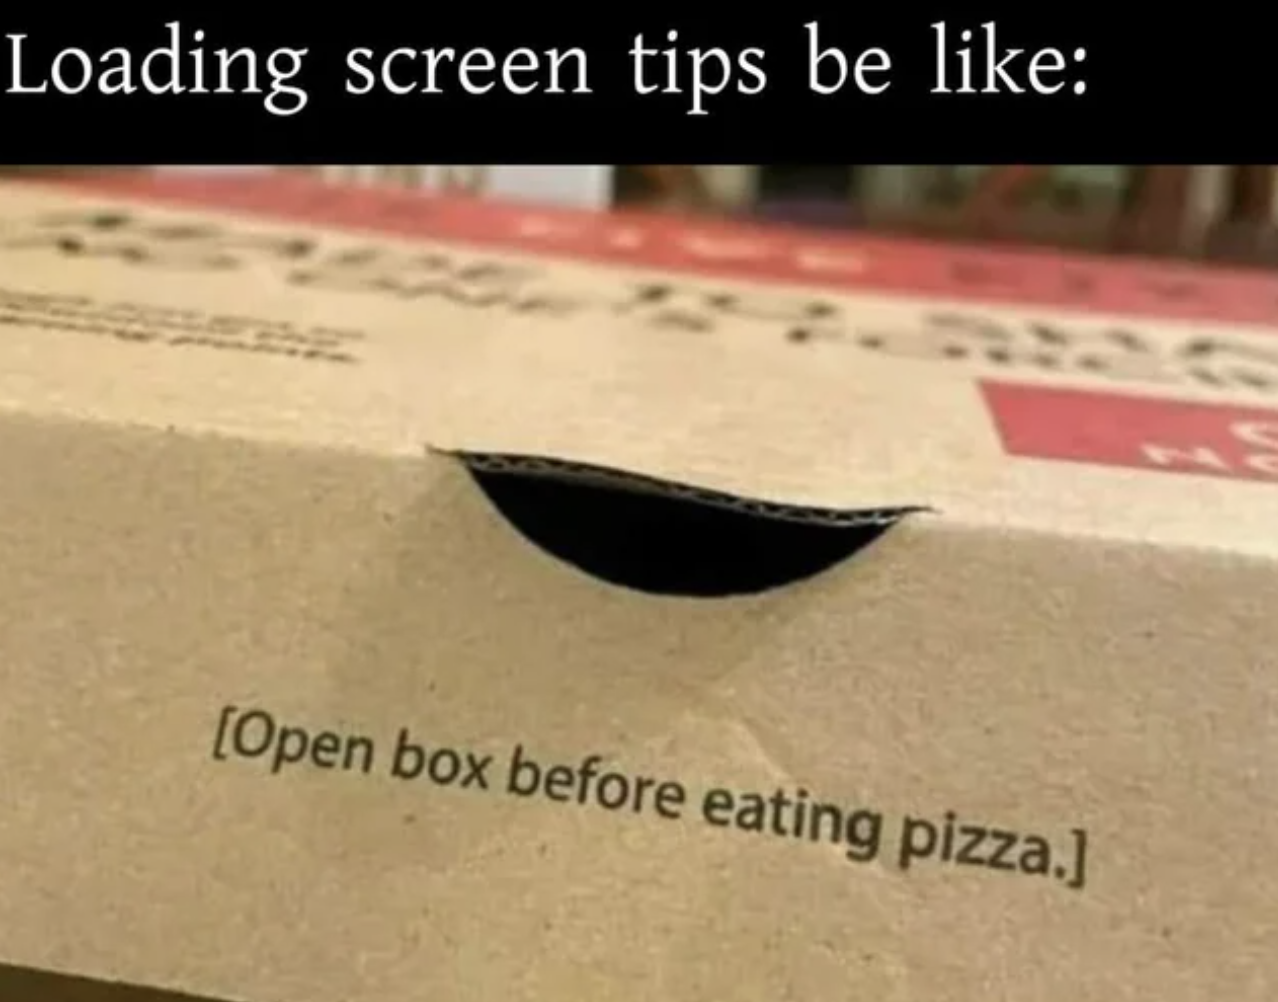 gaming memes - Loading screen tips be Open box before eating pizza.